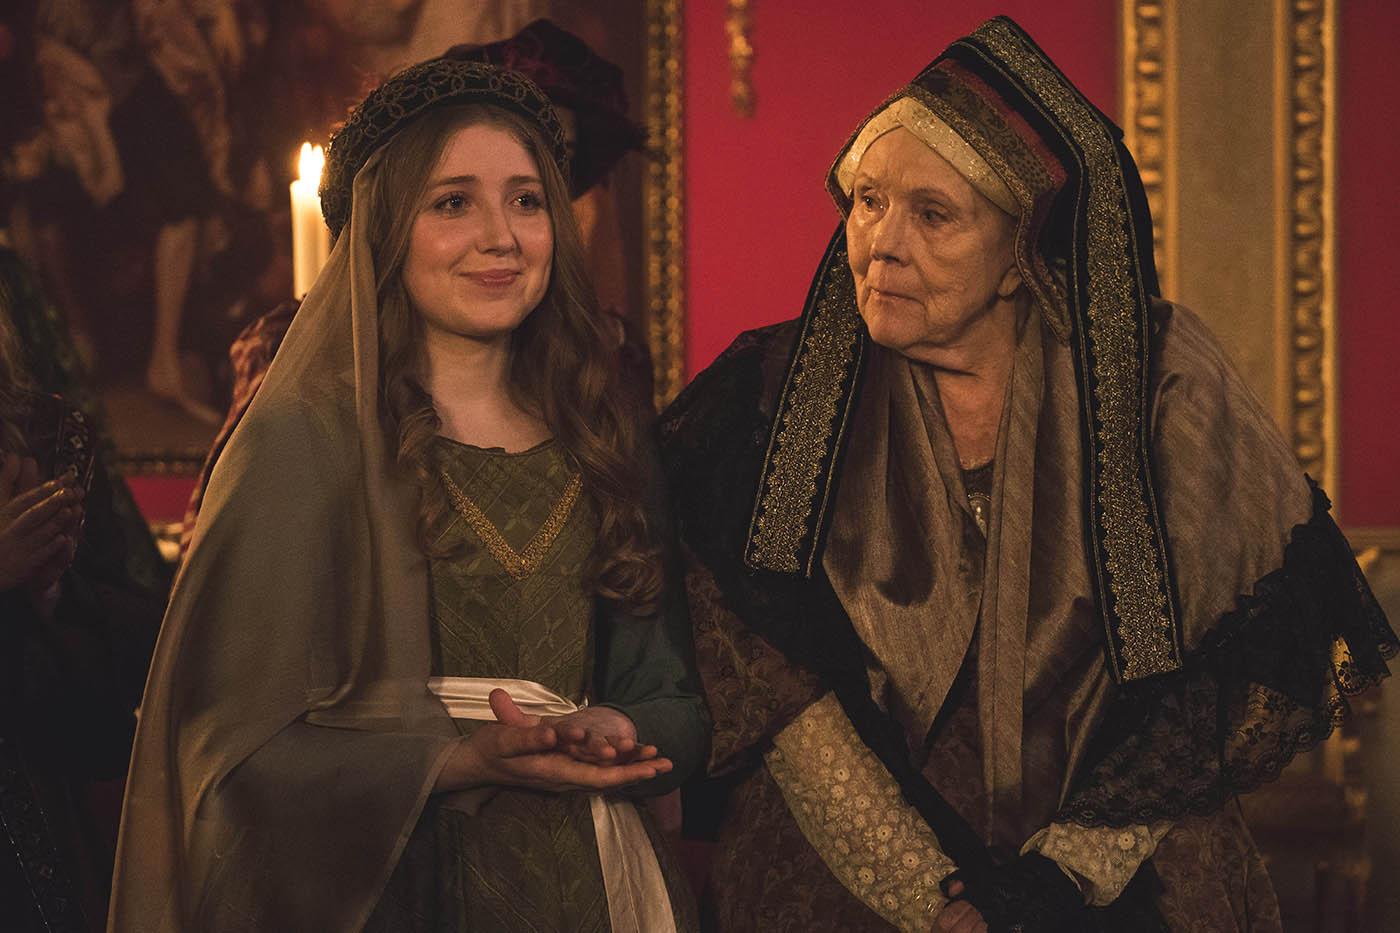 Wilhelmina Coke and the Duchess of Buccleuch (Diana Rigg) in Victoria. Photo: Courtesy of ITV Studios